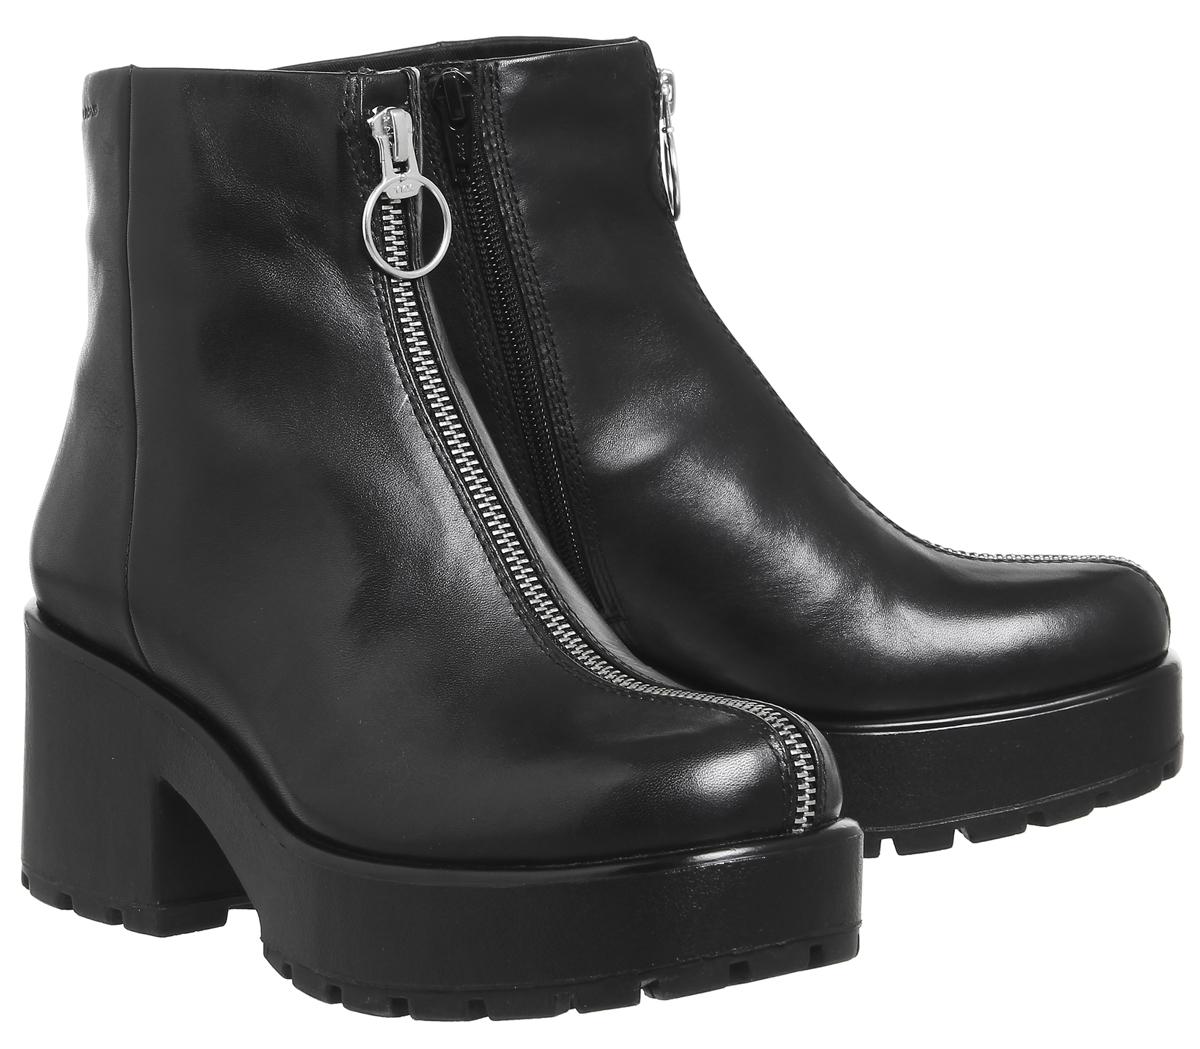 Vagabond Leather Dioon Front Zip Boots in Black - Lyst